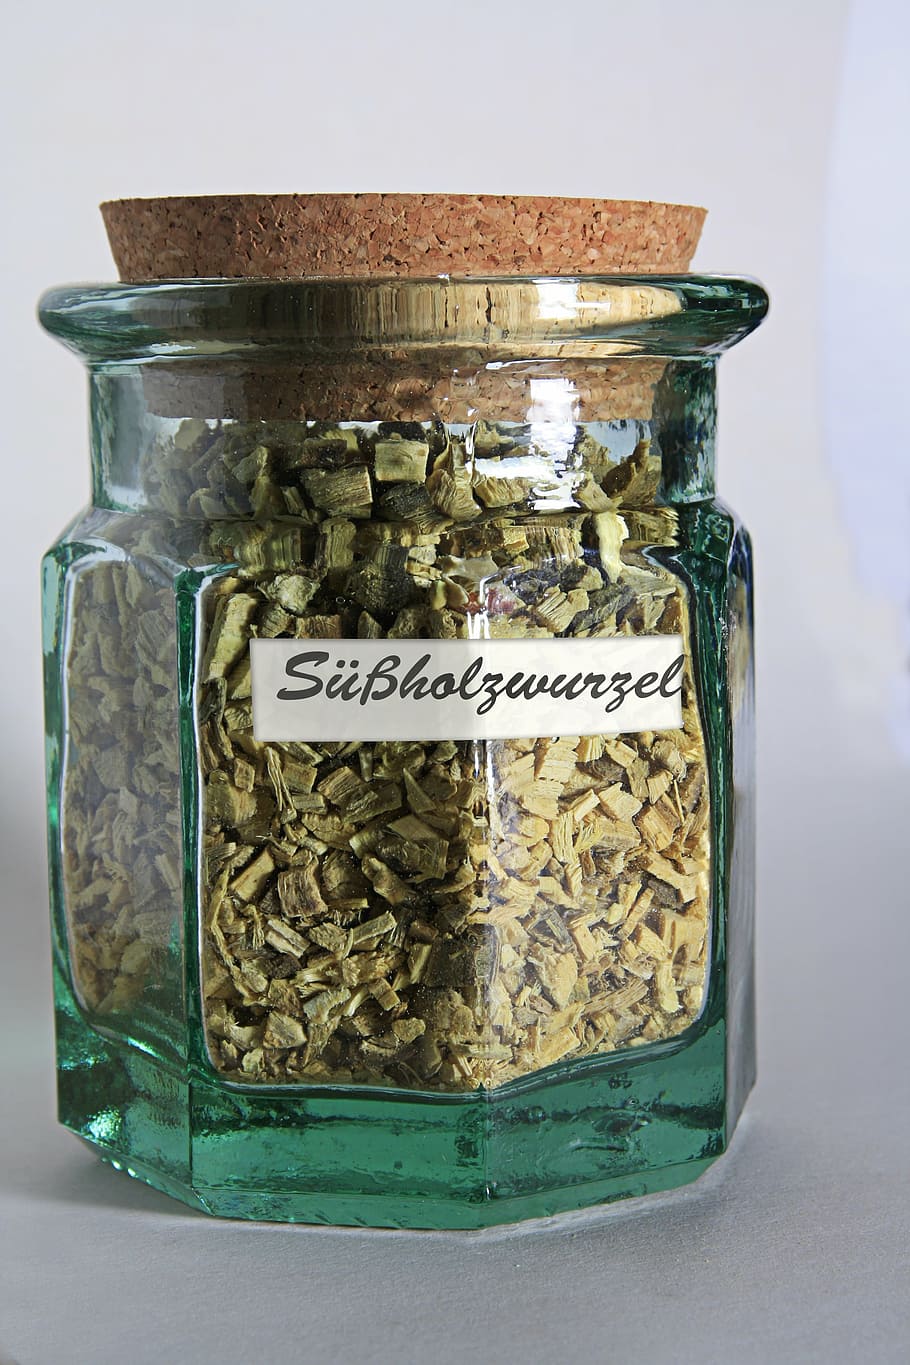 glass sweetener, licorice root, cork, natural product, closures, tree bark, deco, bottle, jar, container